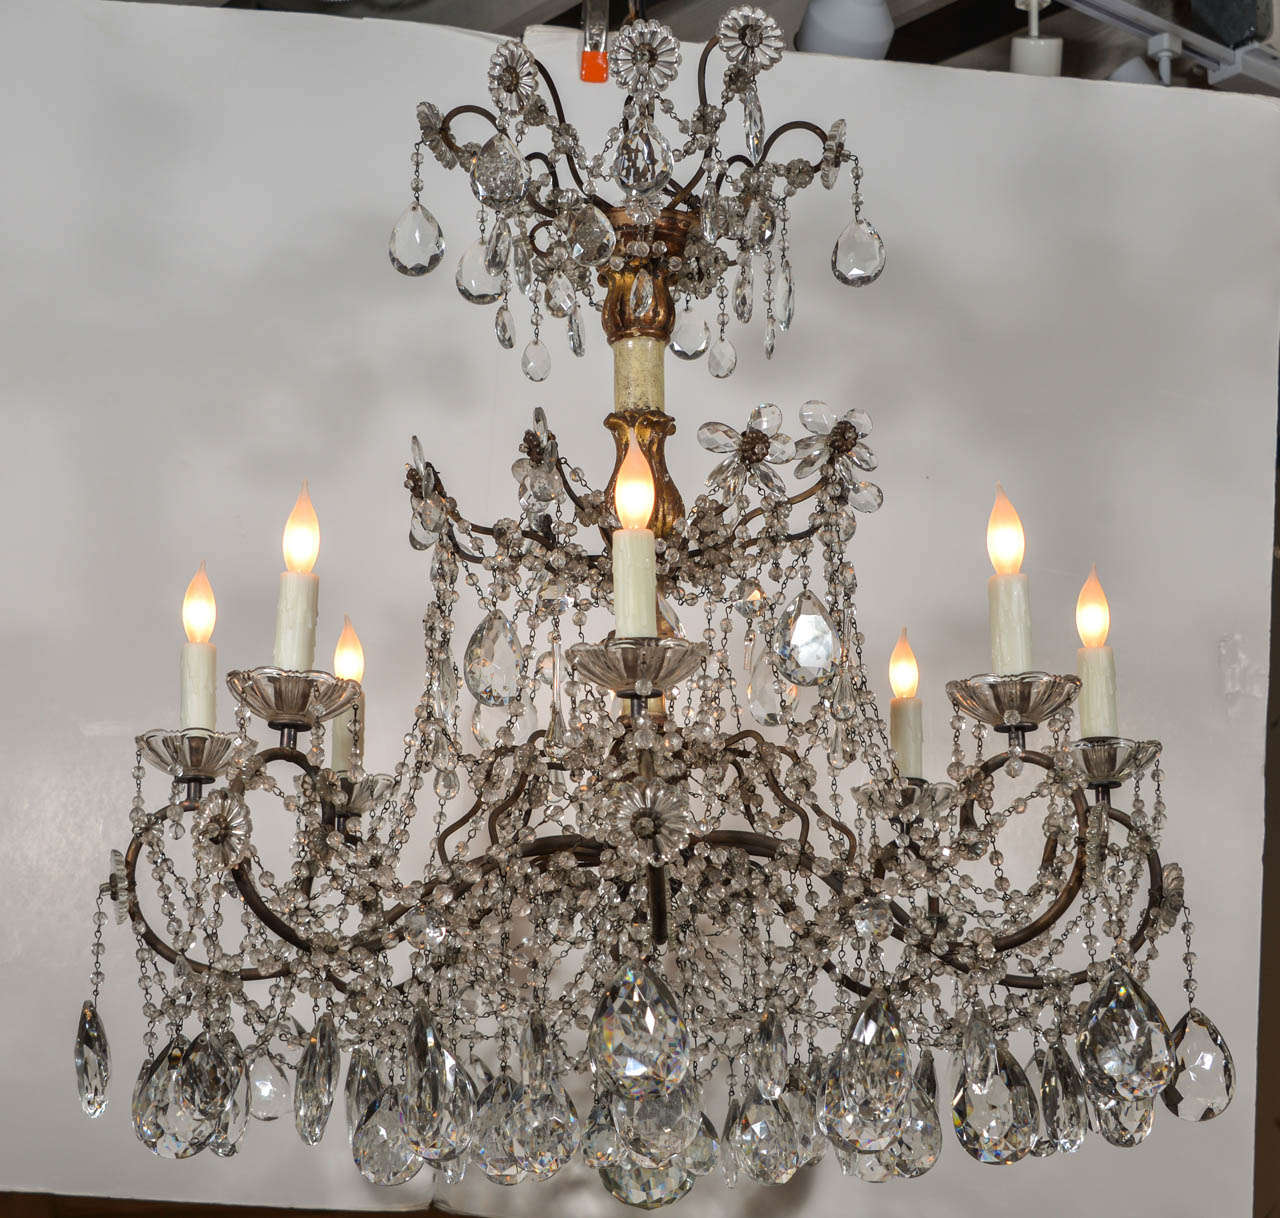 Pair of 19th century 3 tier Genovese chandeliers, each made of a ivory painted wooden stem with carved giltwood acanthus details and 8 undulating iron arms, with gilt iron and crystal flower motifs, draped in clear glass bead chains with suspended